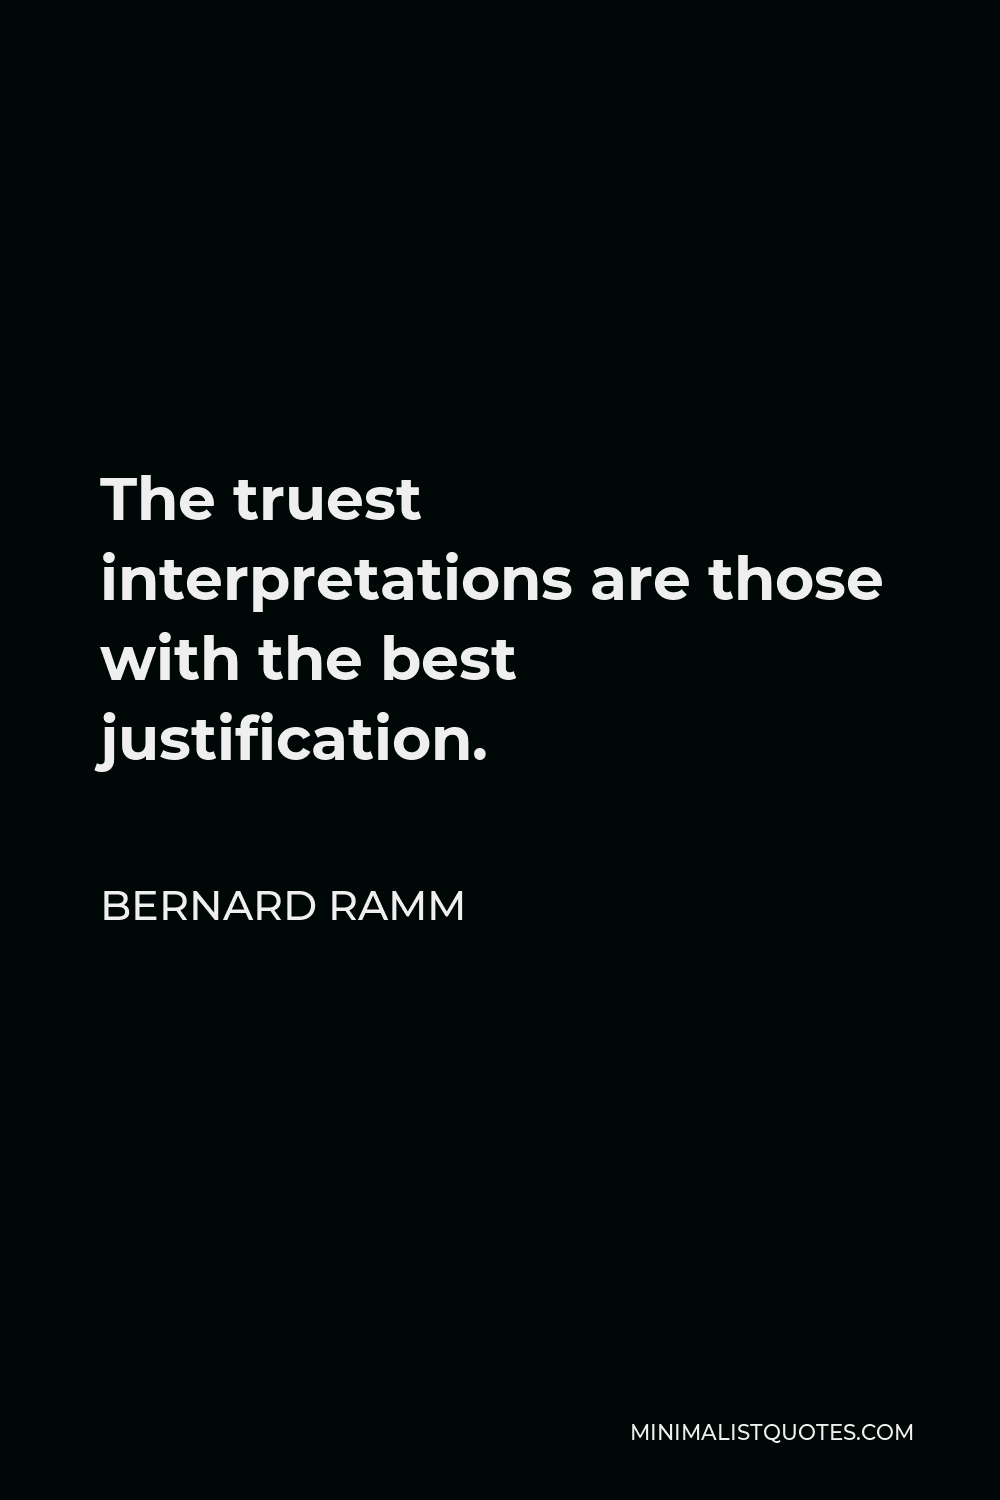 Bernard Ramm Quote - The truest interpretations are those with the best justification.